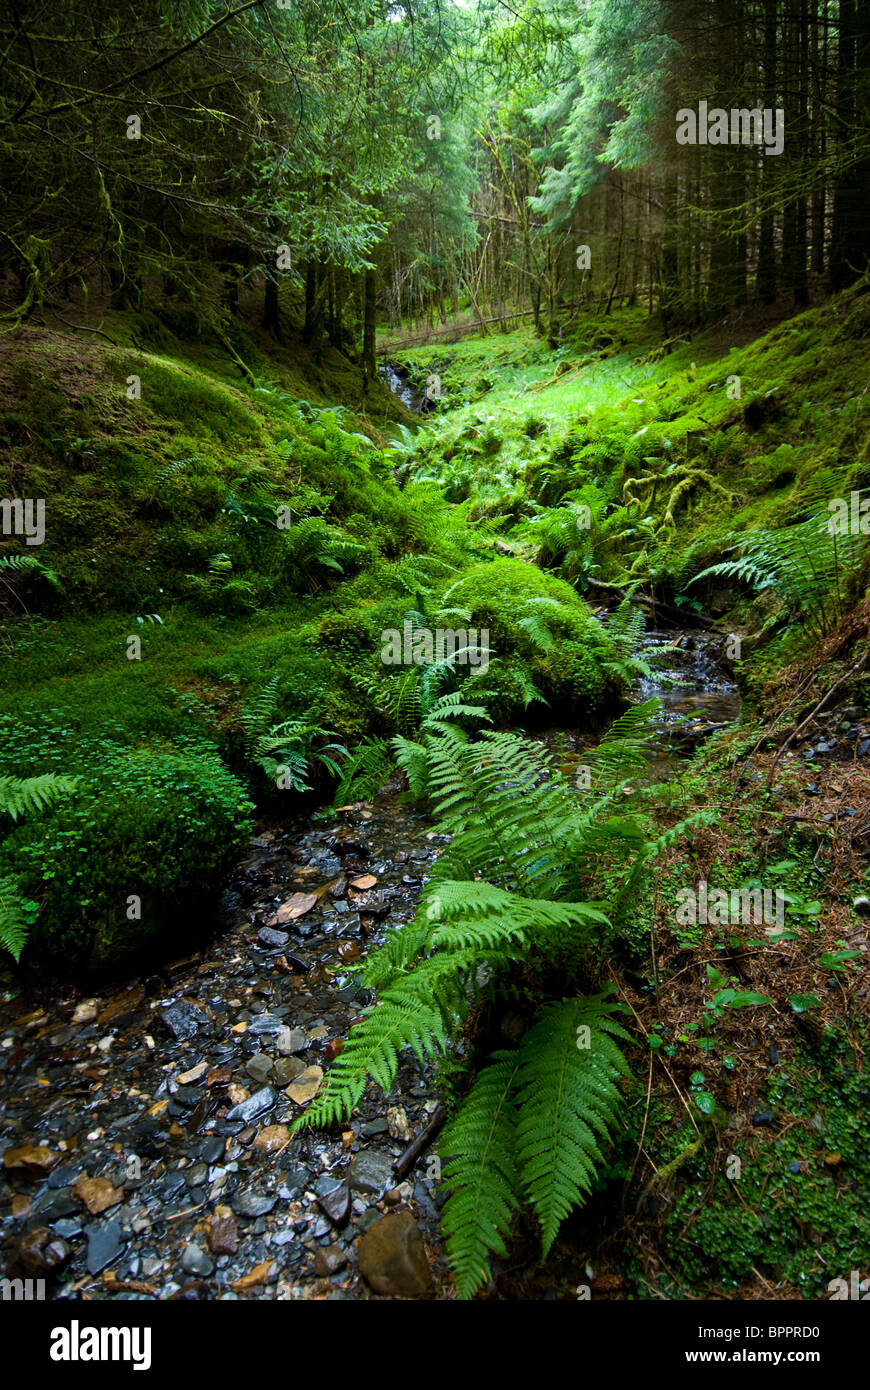 Ancient woodland with pine trees, moss and ferns Stock Photo